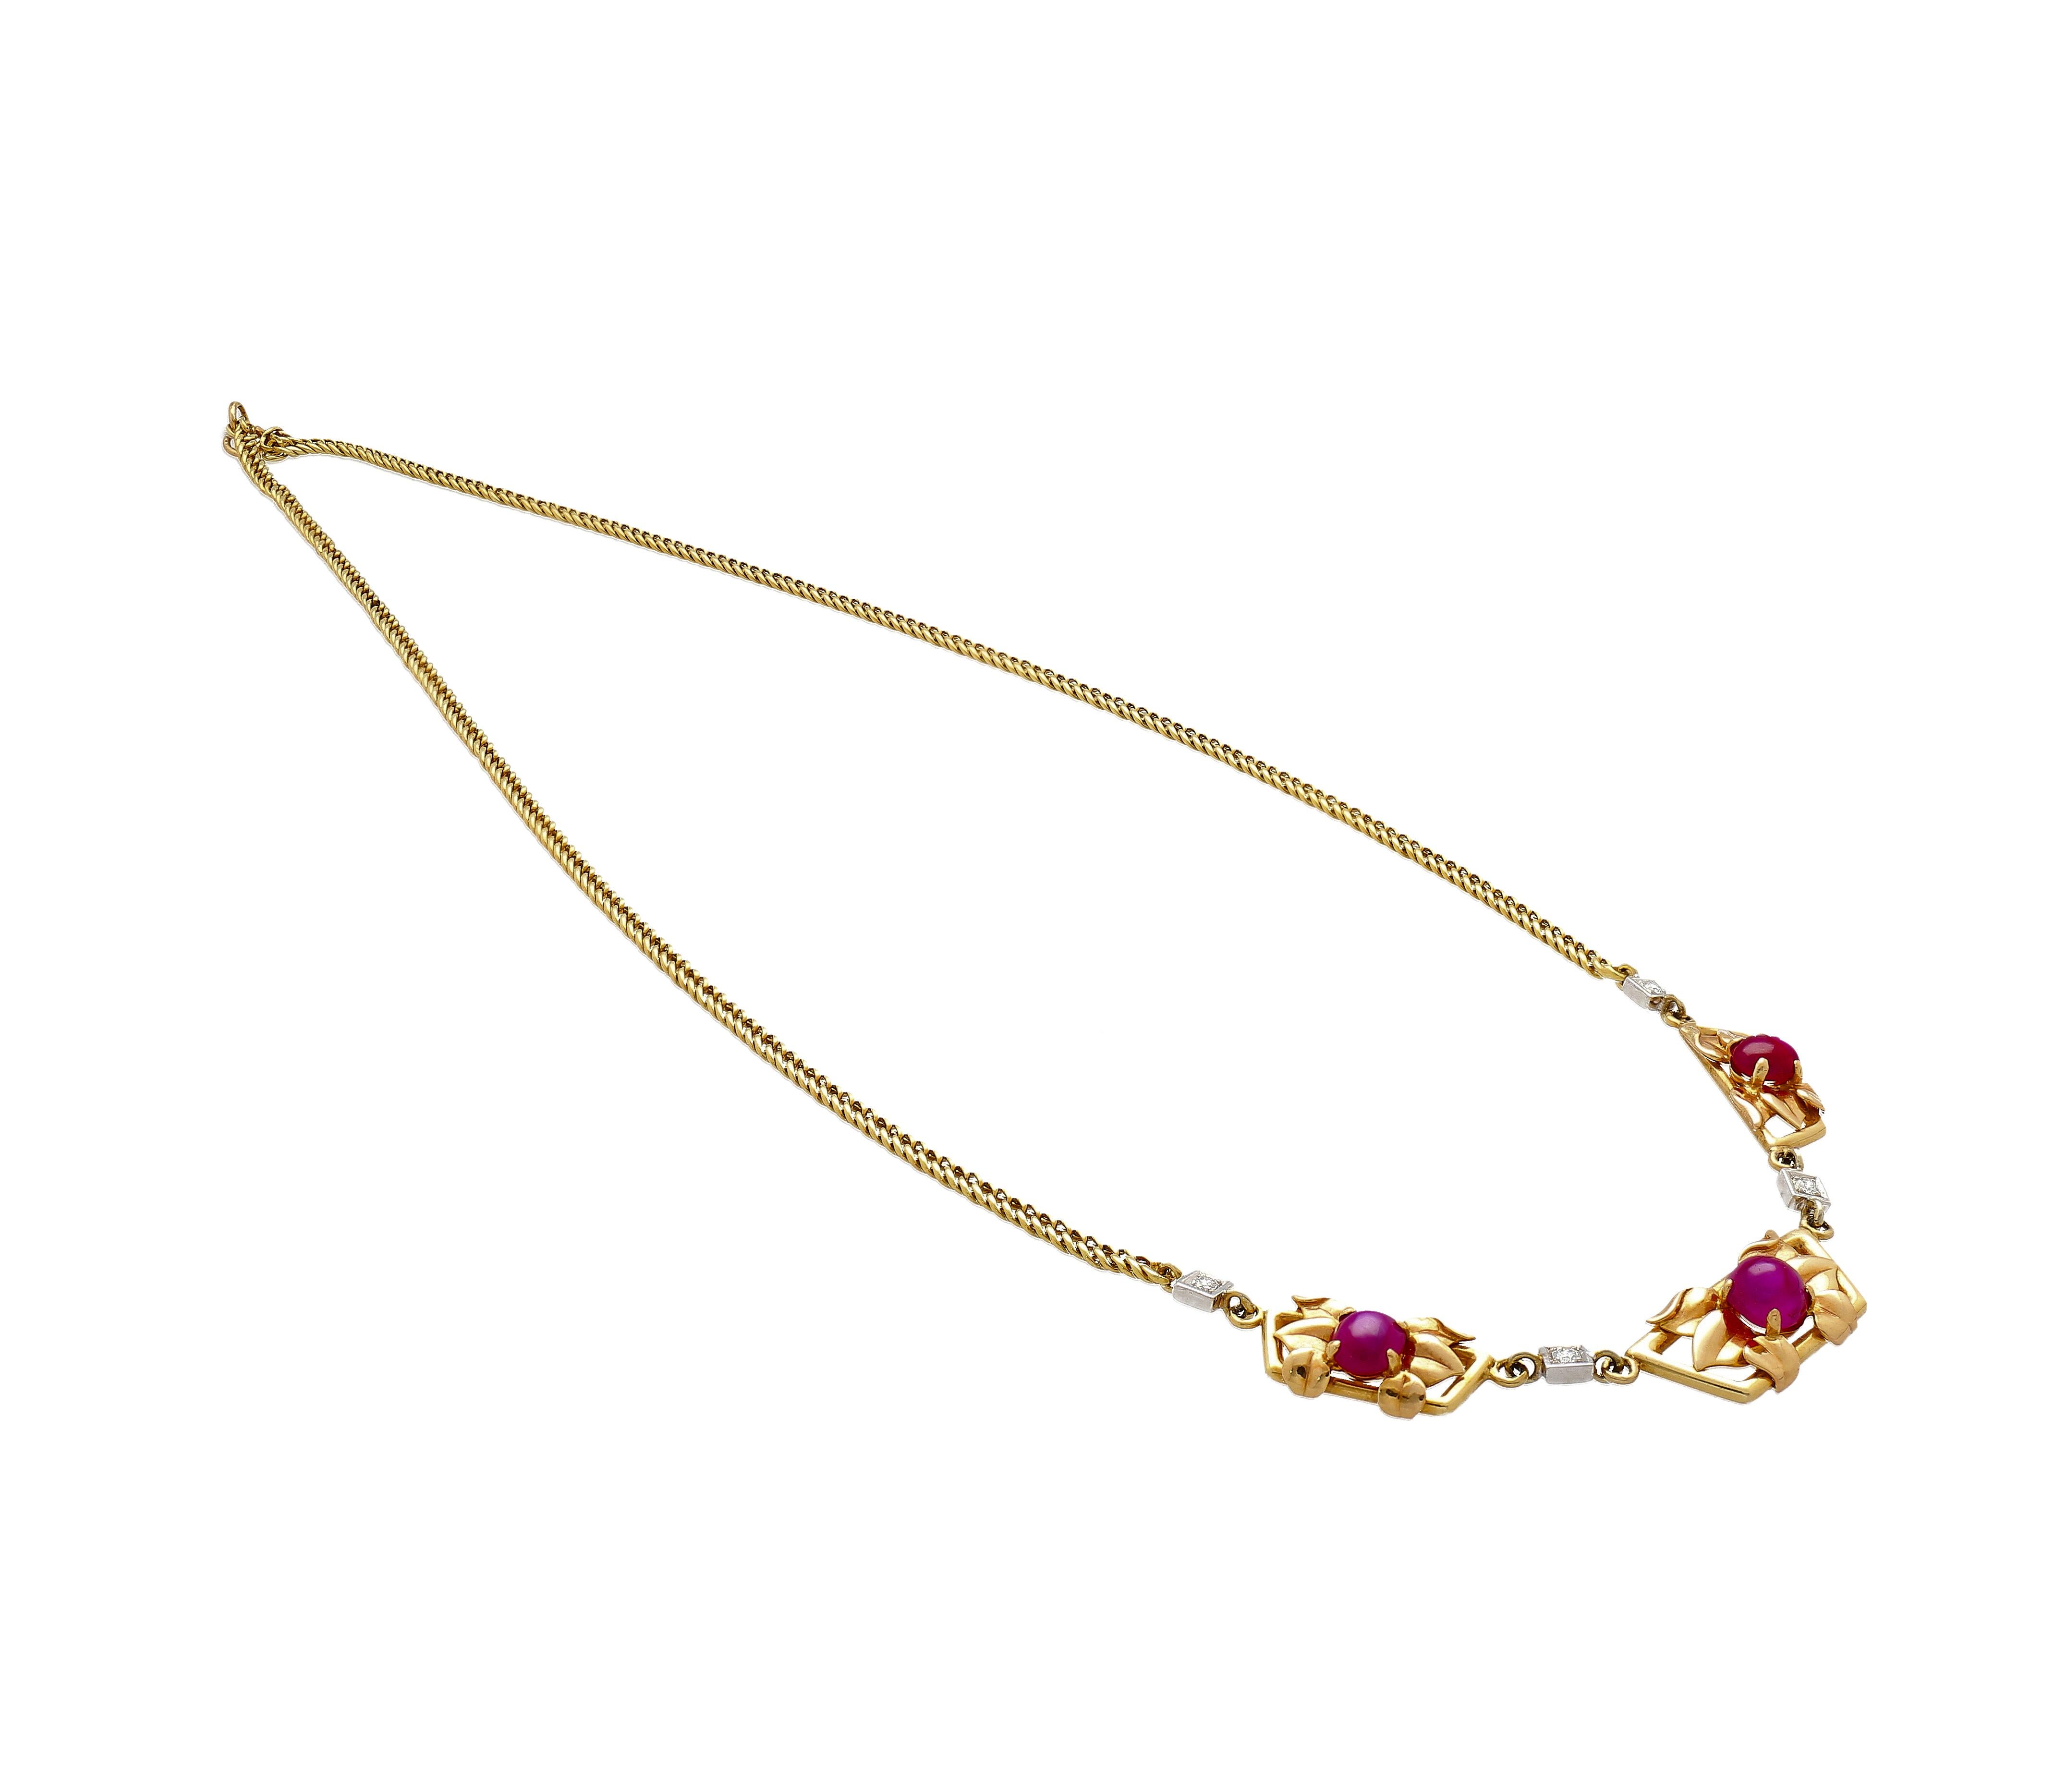 6.22 Carat Star-Ruby with Gold Detailing & Diamonds in 14K Gold Charm Necklace In Excellent Condition For Sale In Miami, FL